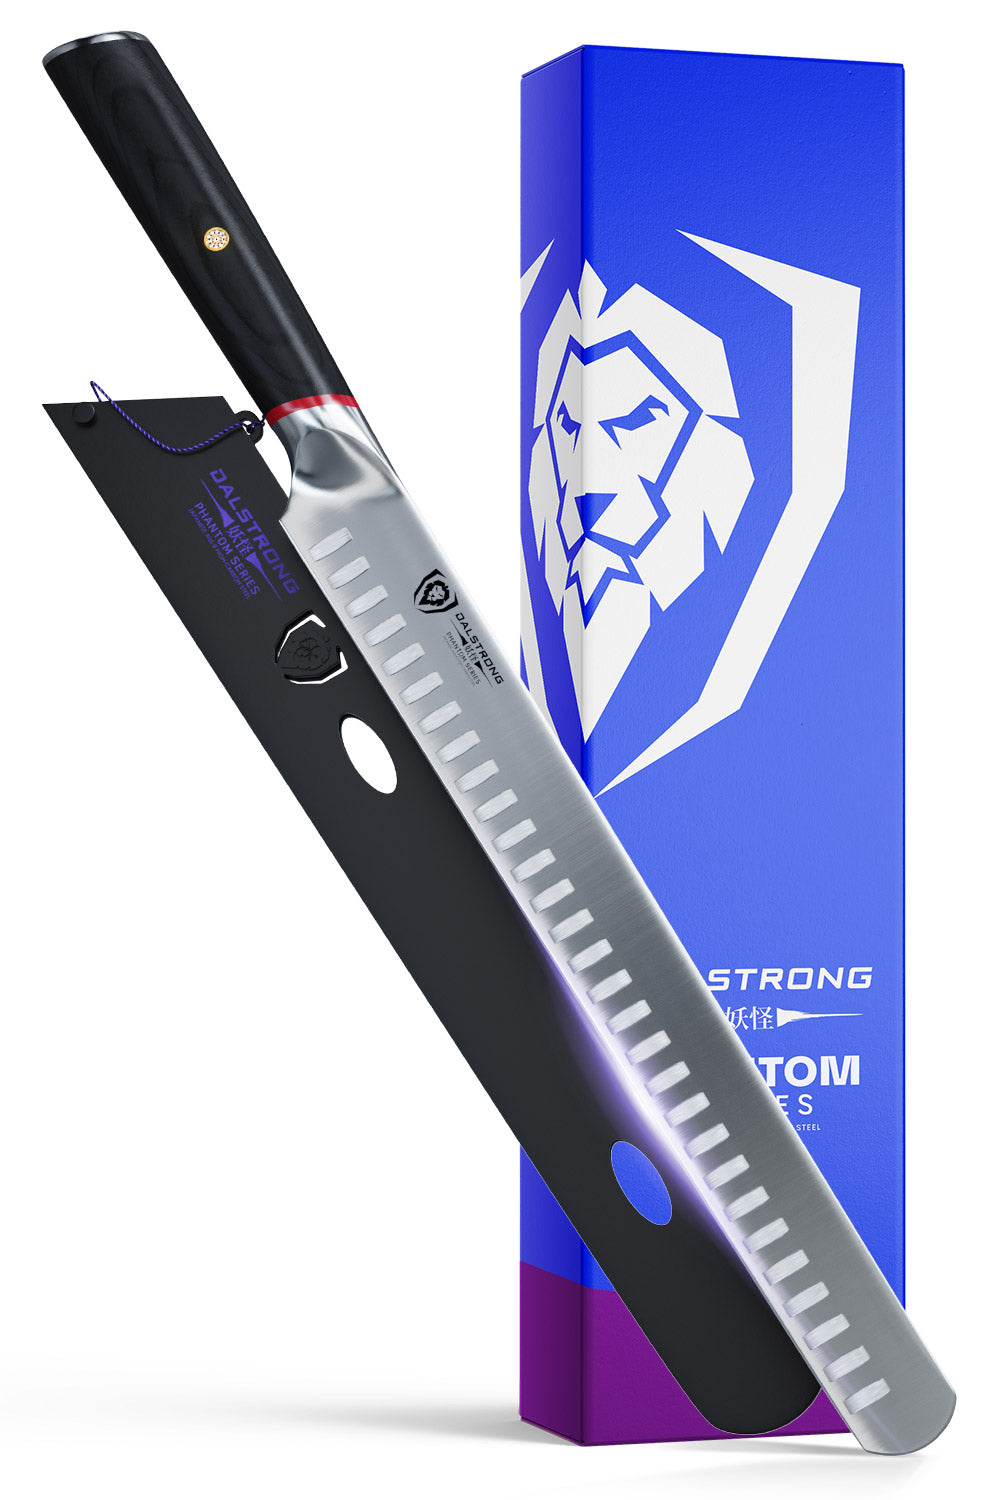 Dalstrong phantom series 12 inch slicer knife with pakka wood handle in front of it's premium packaging.